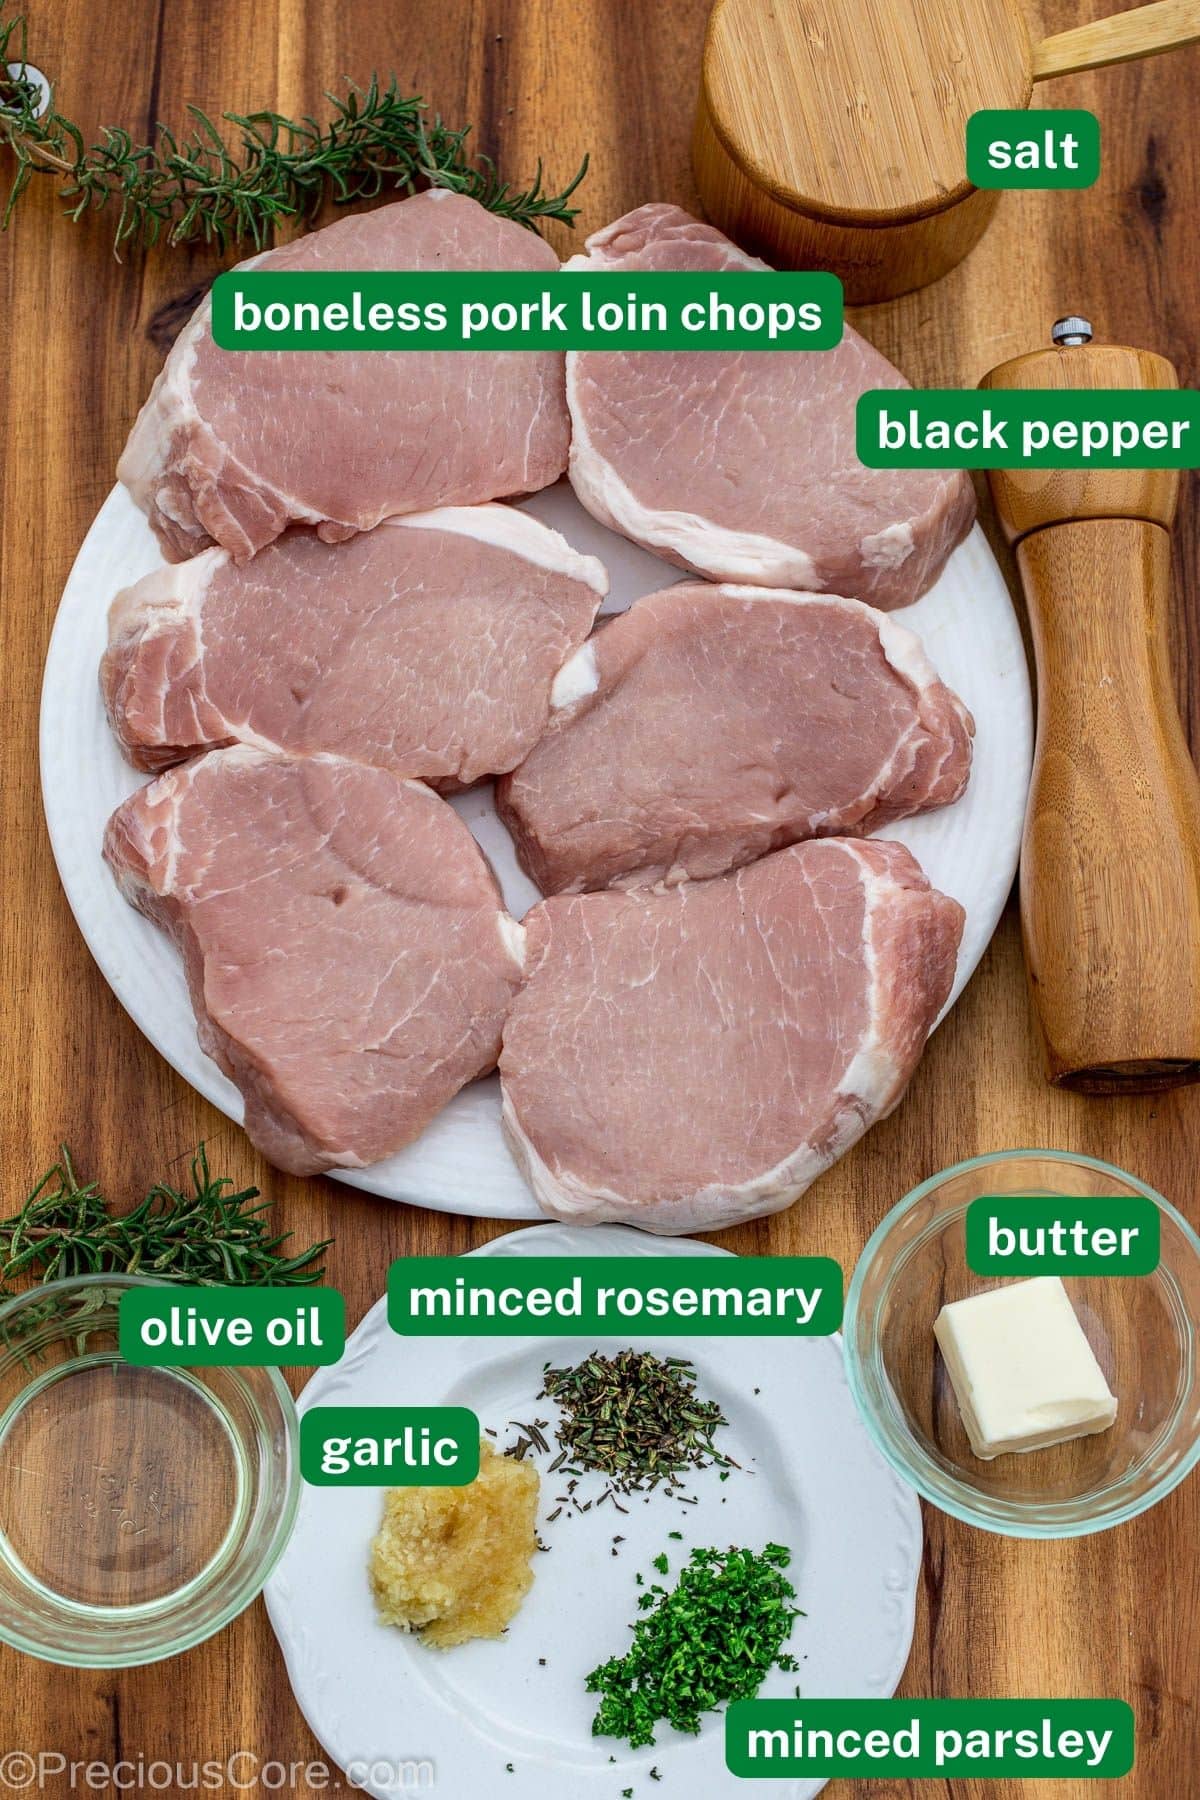 Ingredients for pork chops with labels over the ingredients. They include boneless pork chops, salt, pepper, olive oil, butter, garlic, and rosemary. 